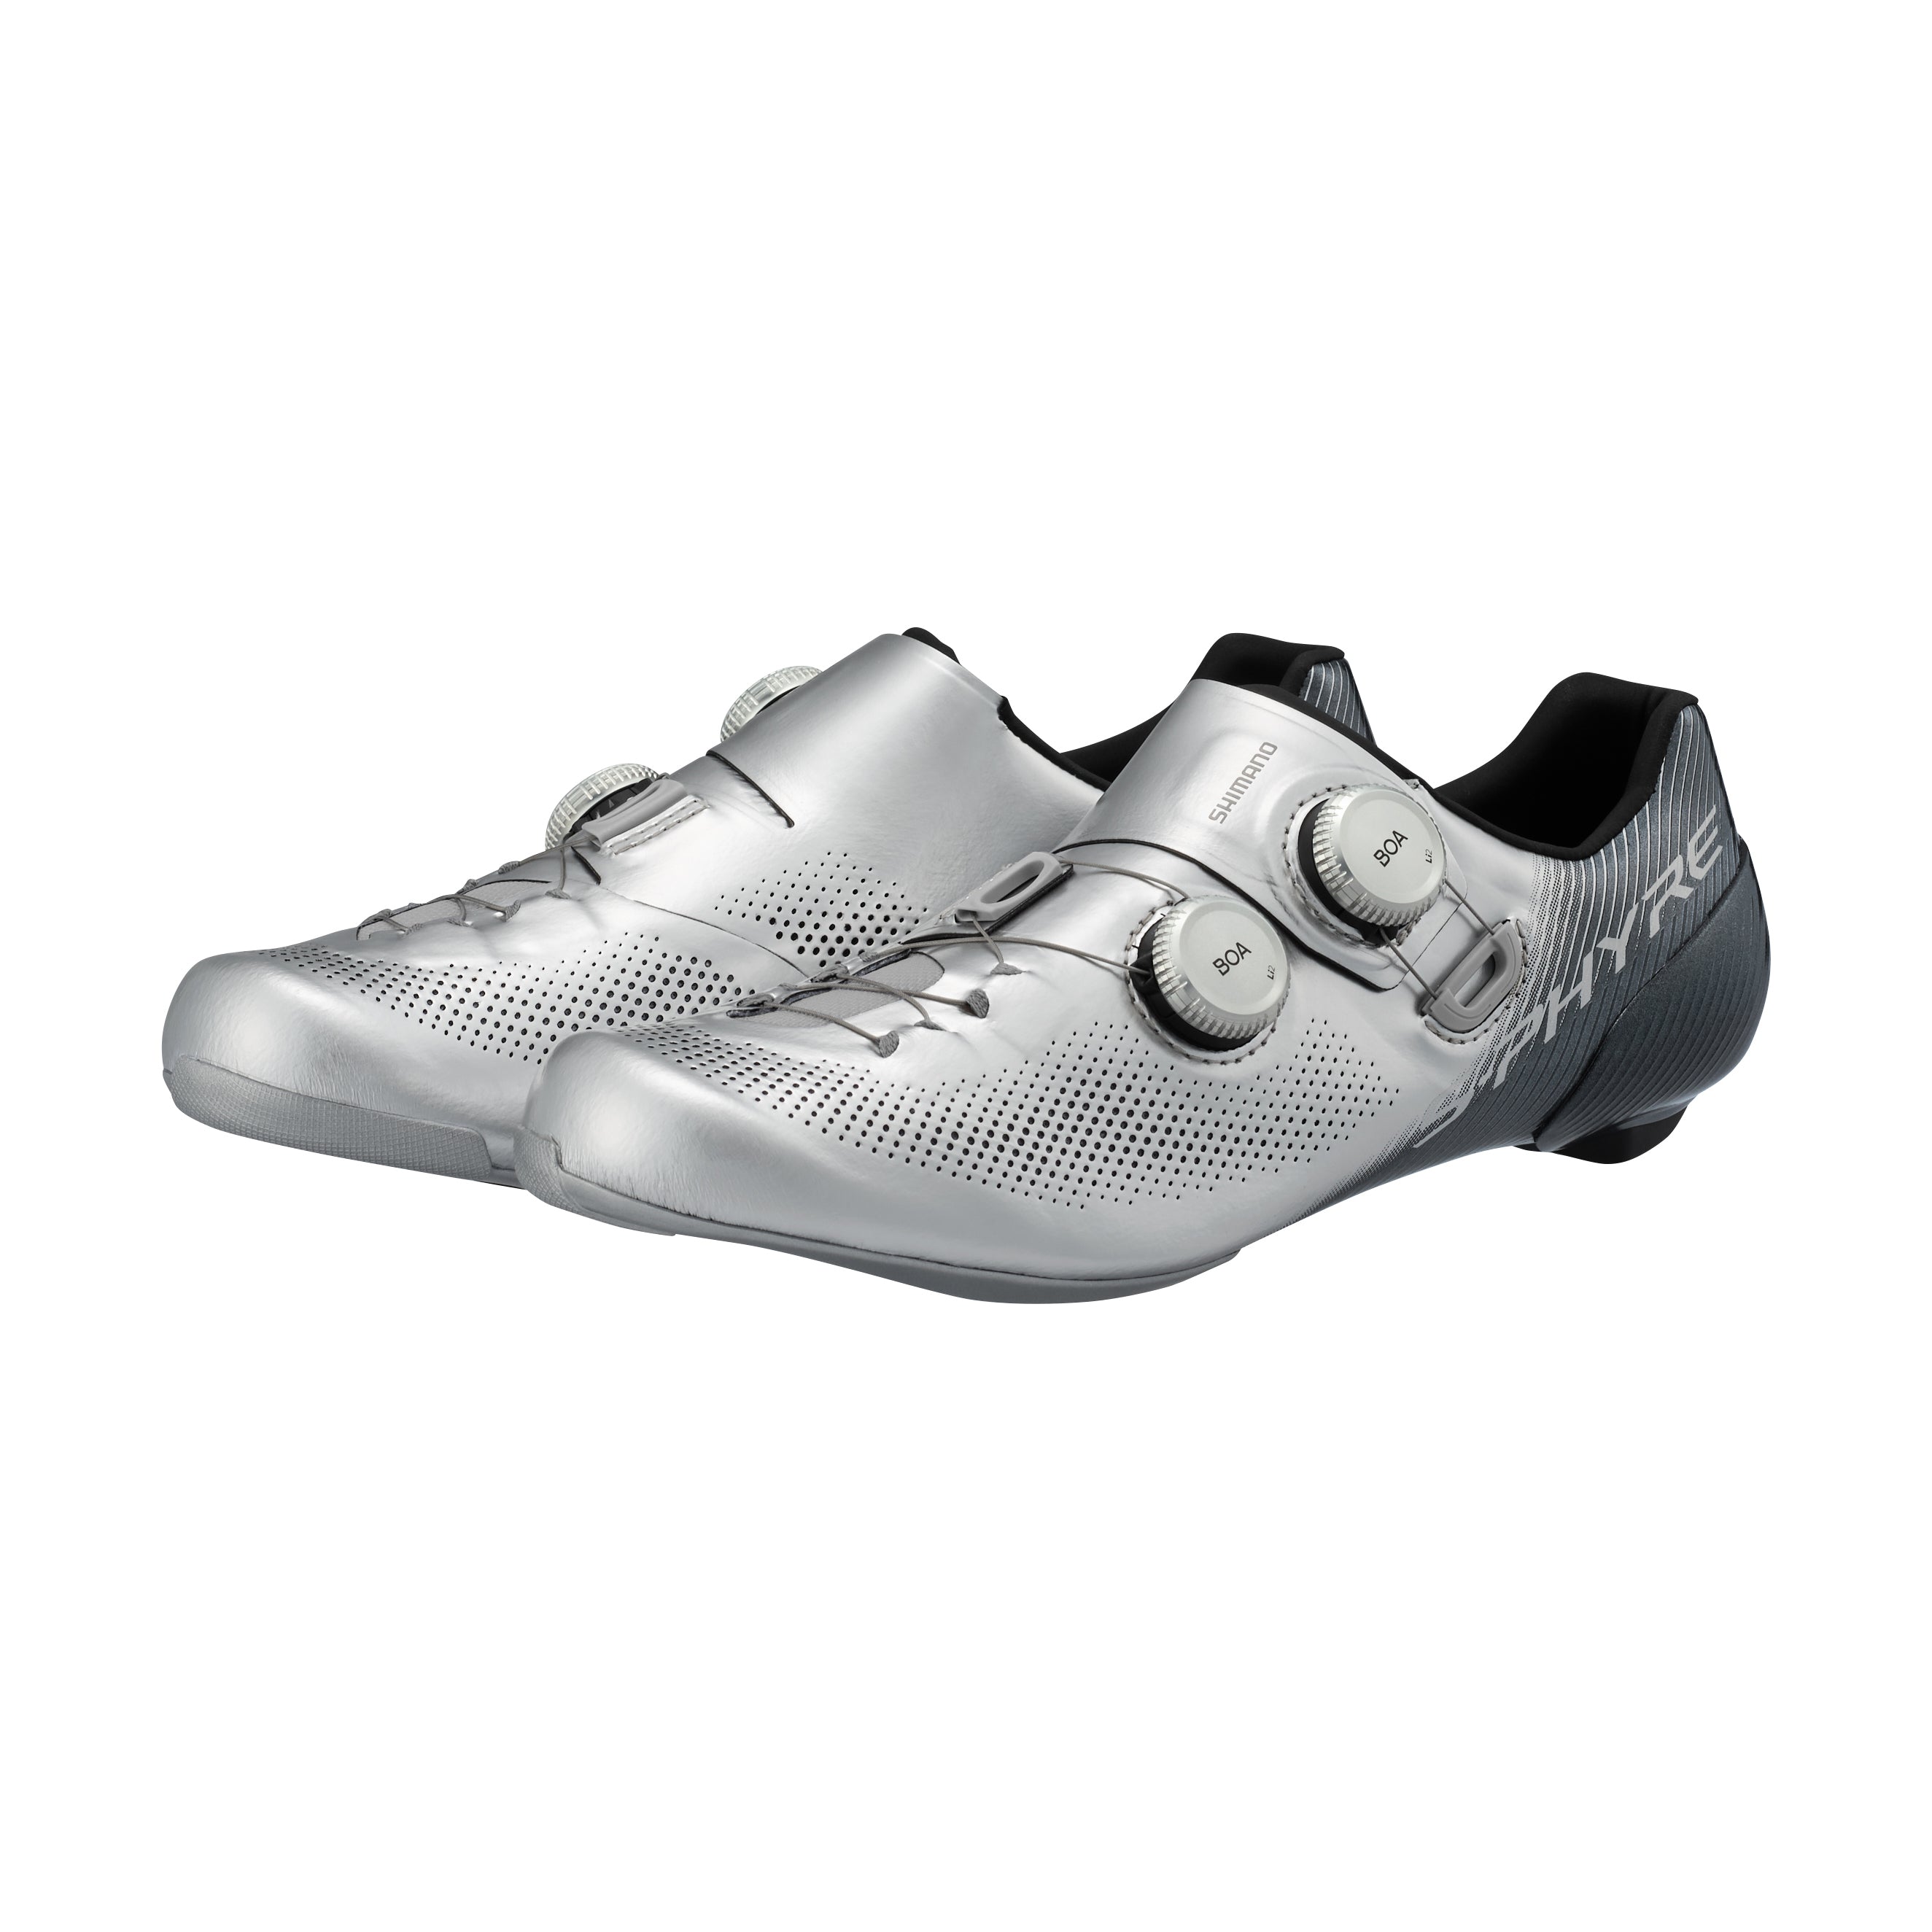 SHIMANO SH-RC903S S-PHYRE road shoes-wide silver-black special edition